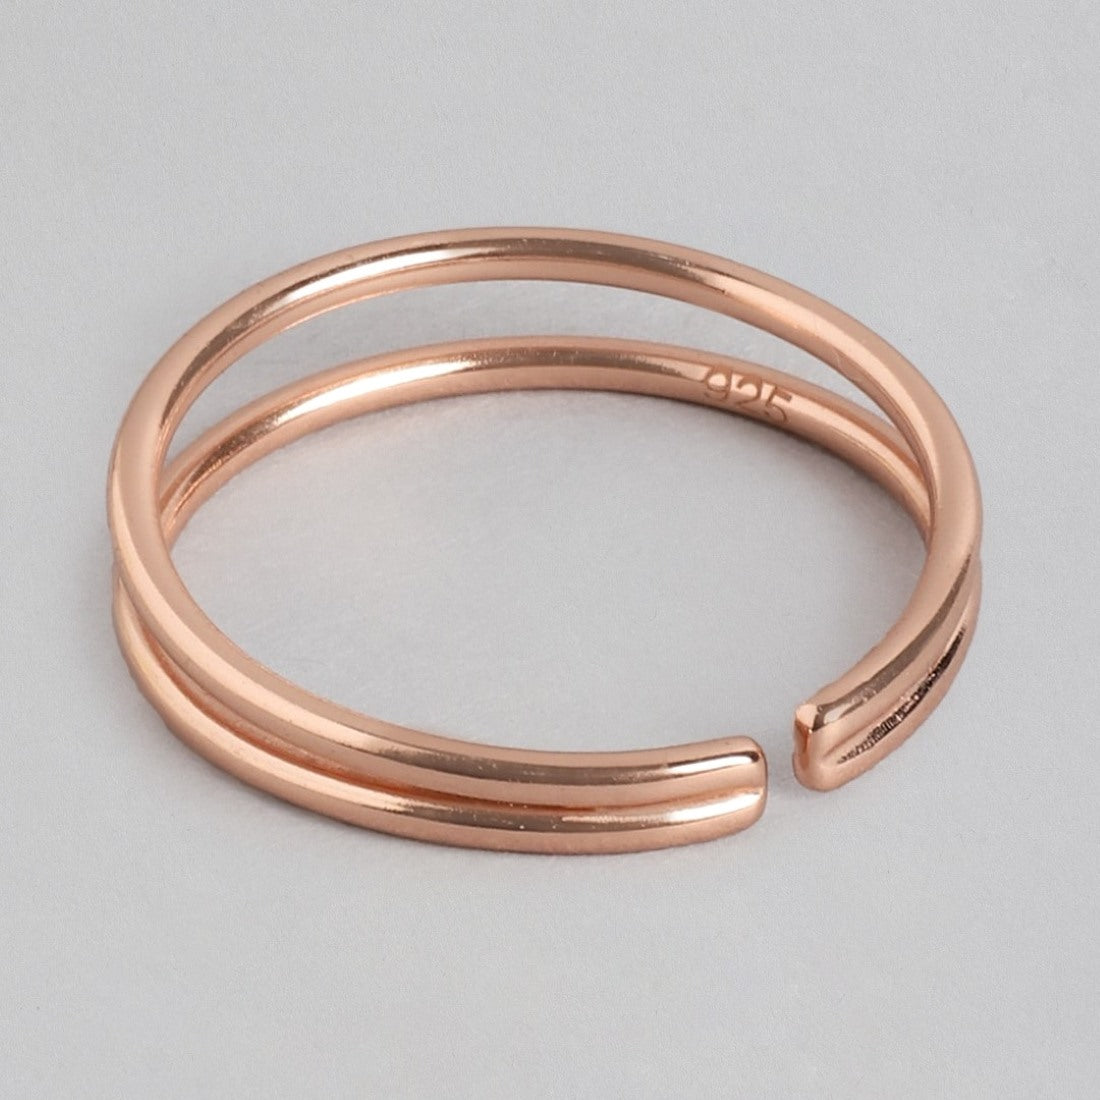 Rosy Radiance 925 Sterling Silver Rose Gold-Plated Women's Ring (Adjustable)